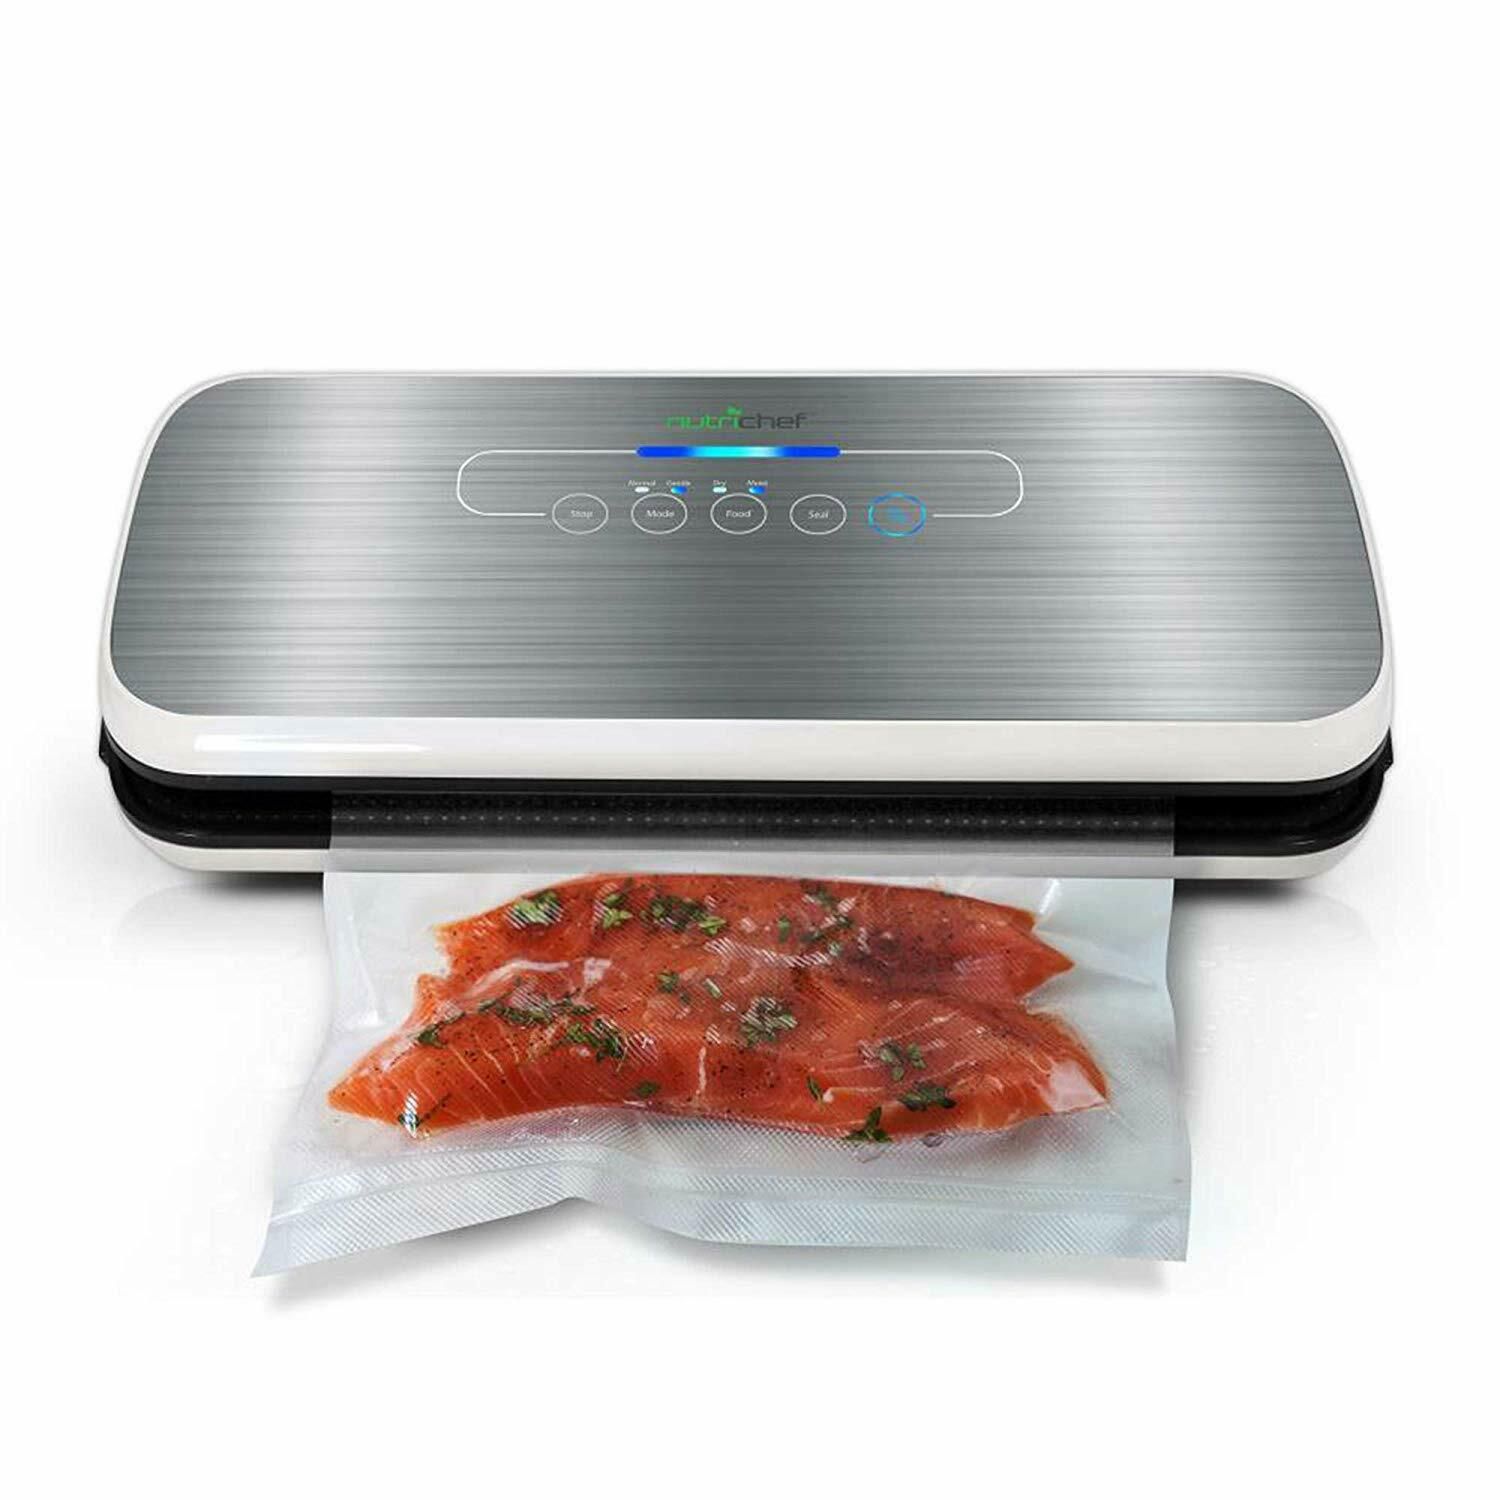 Vacuum Sealer By NutriChef | Automatic Vacuum Air Sealing System For Food Kit